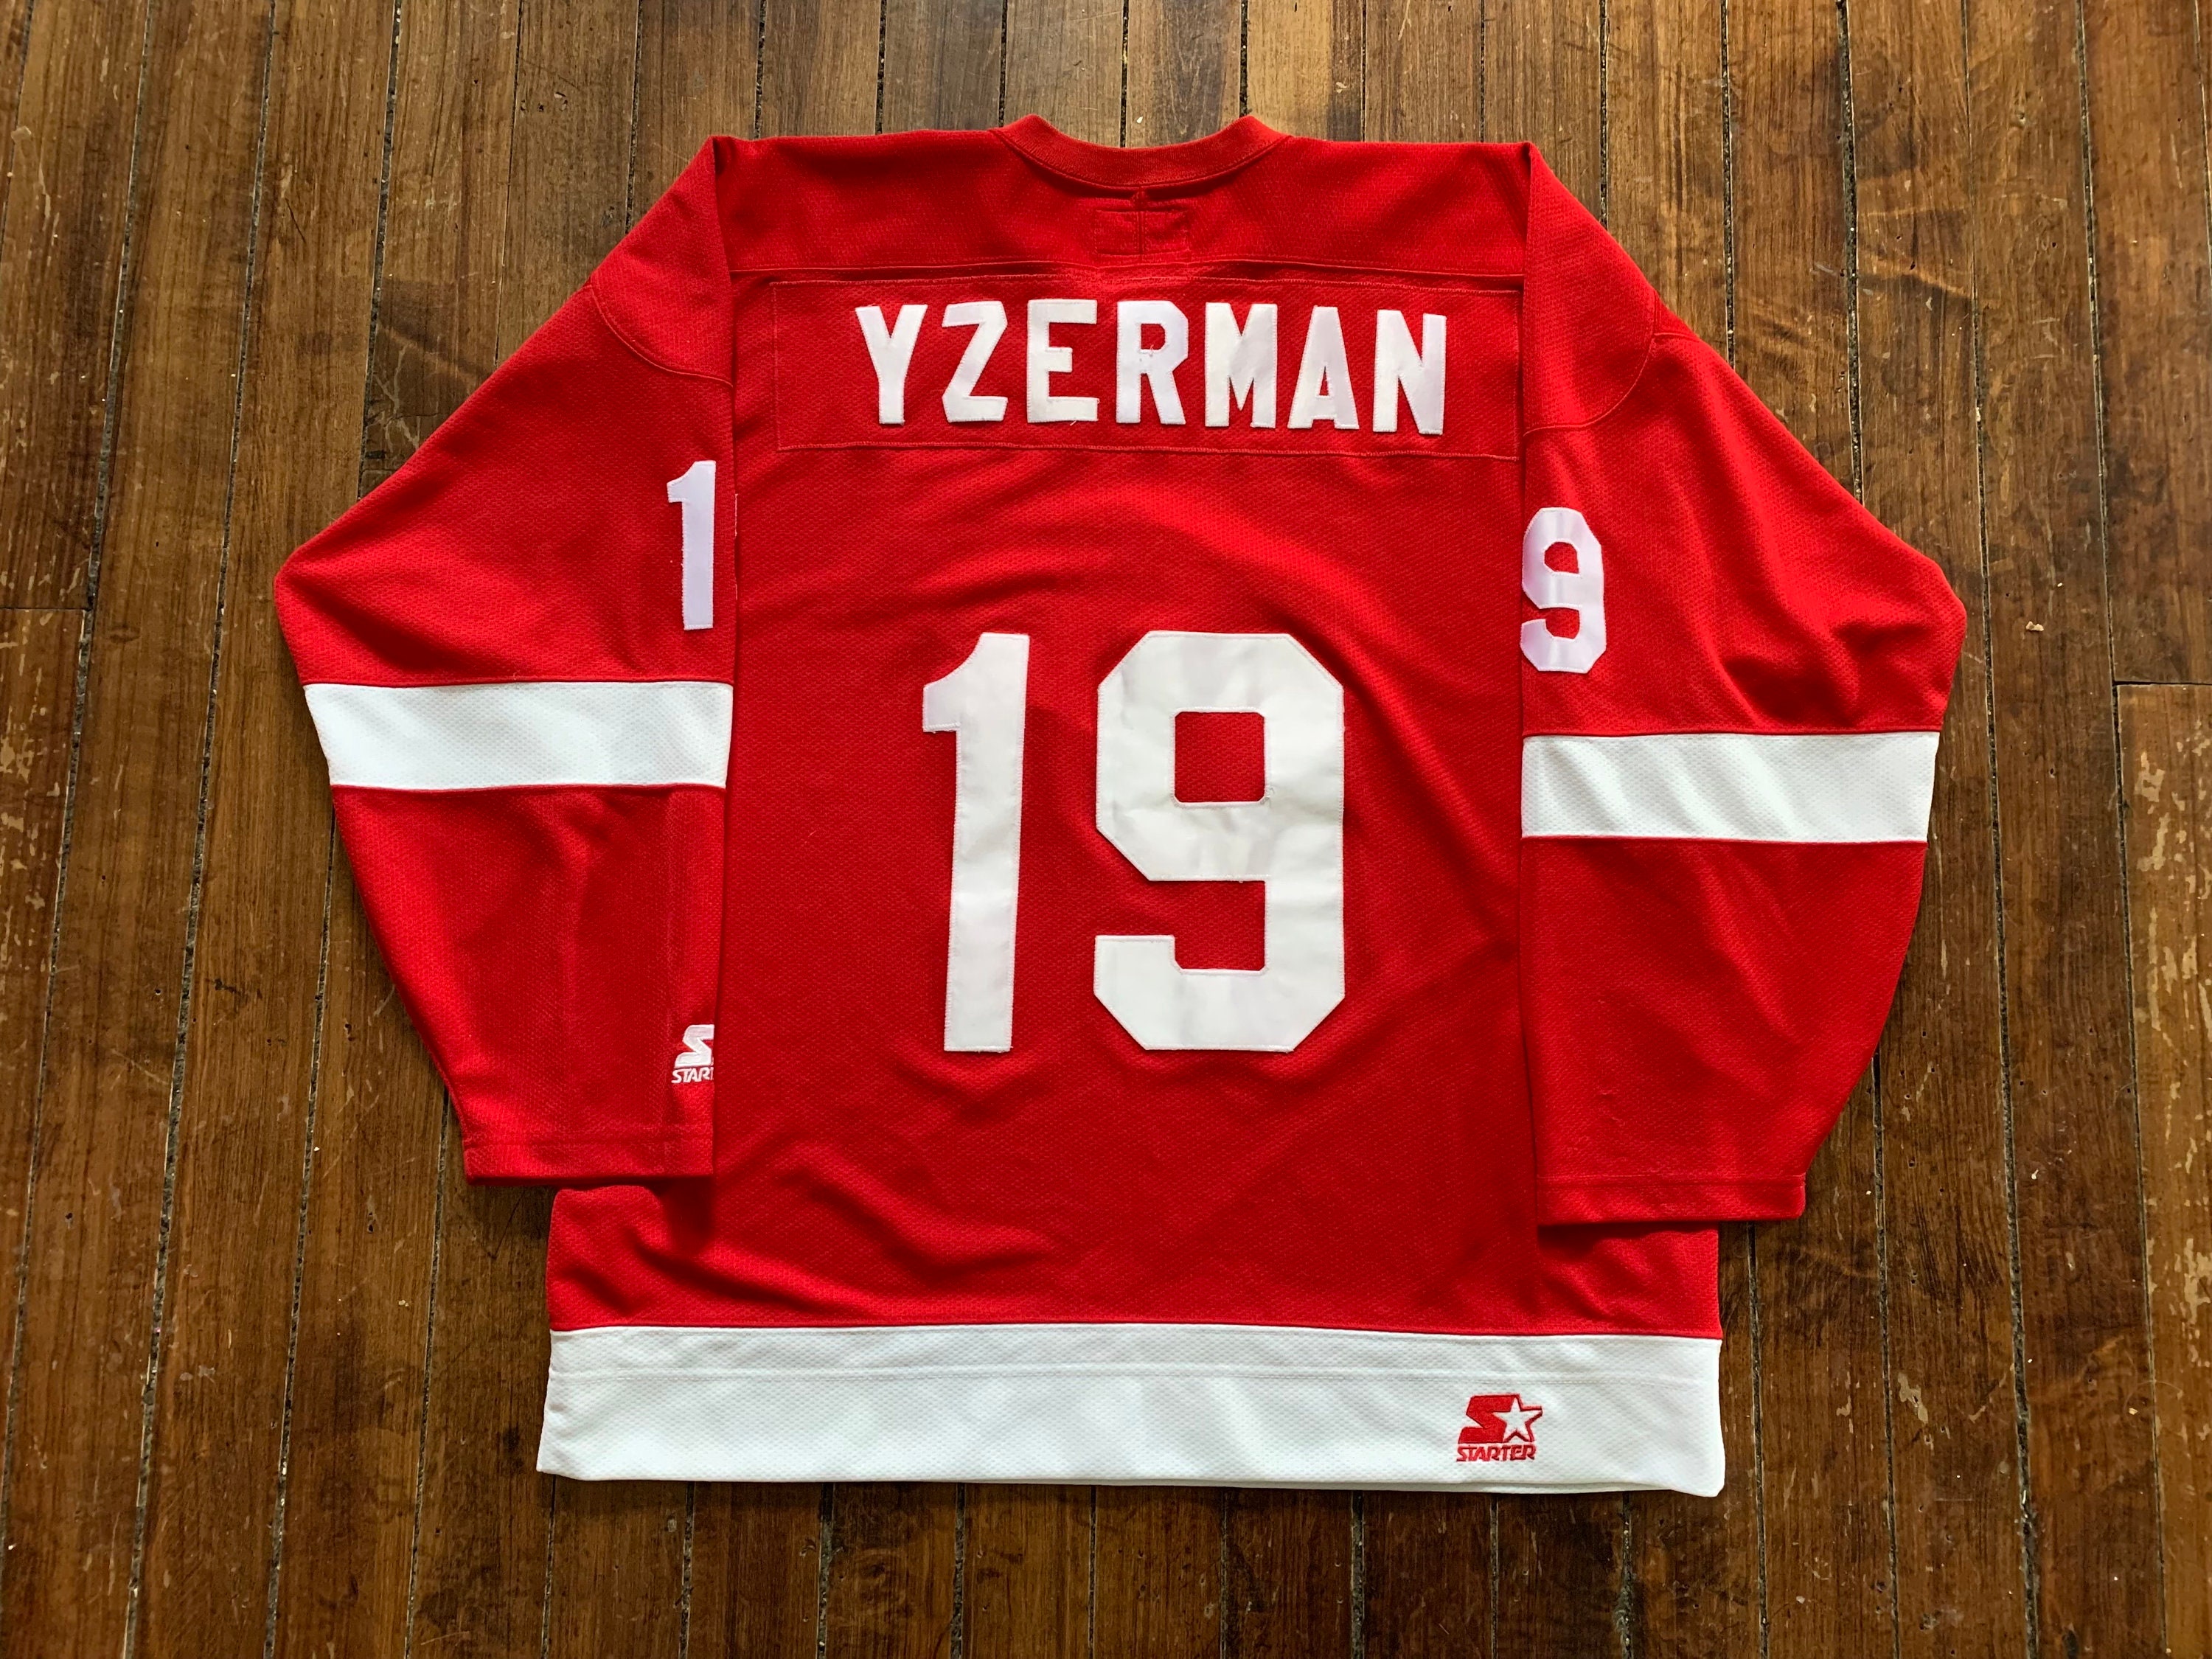 American Jewelry and Loan - Check out our signed Steve Yzerman